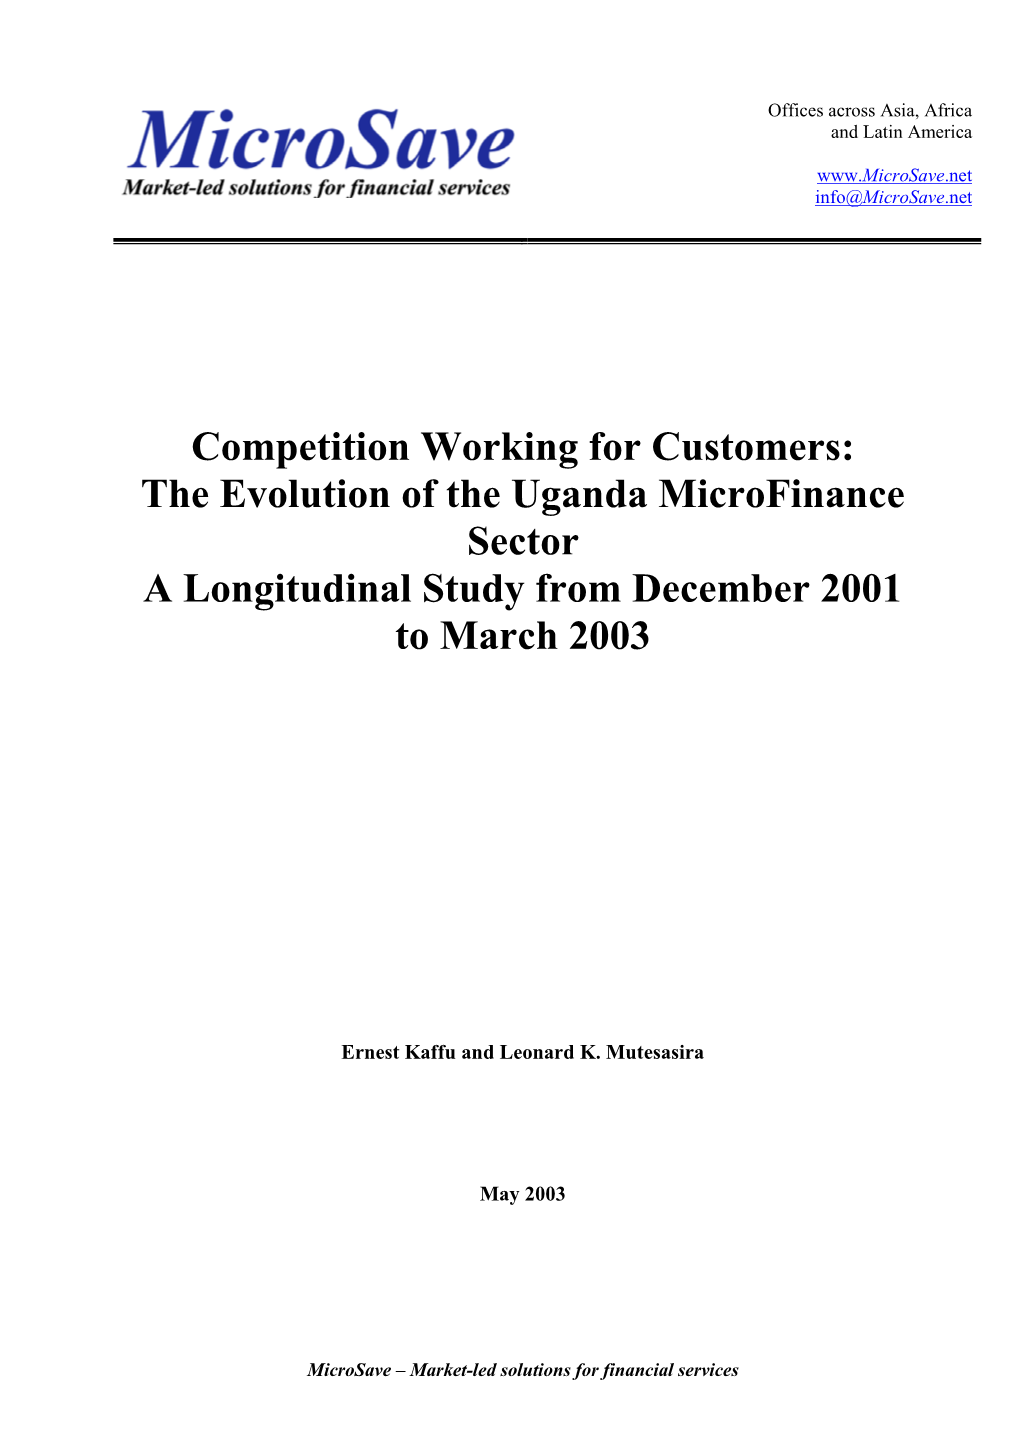 Competition Working for Customers: the Evolution of the Uganda Microfinance Sector a Longitudinal Study from December 2001 to March 2003